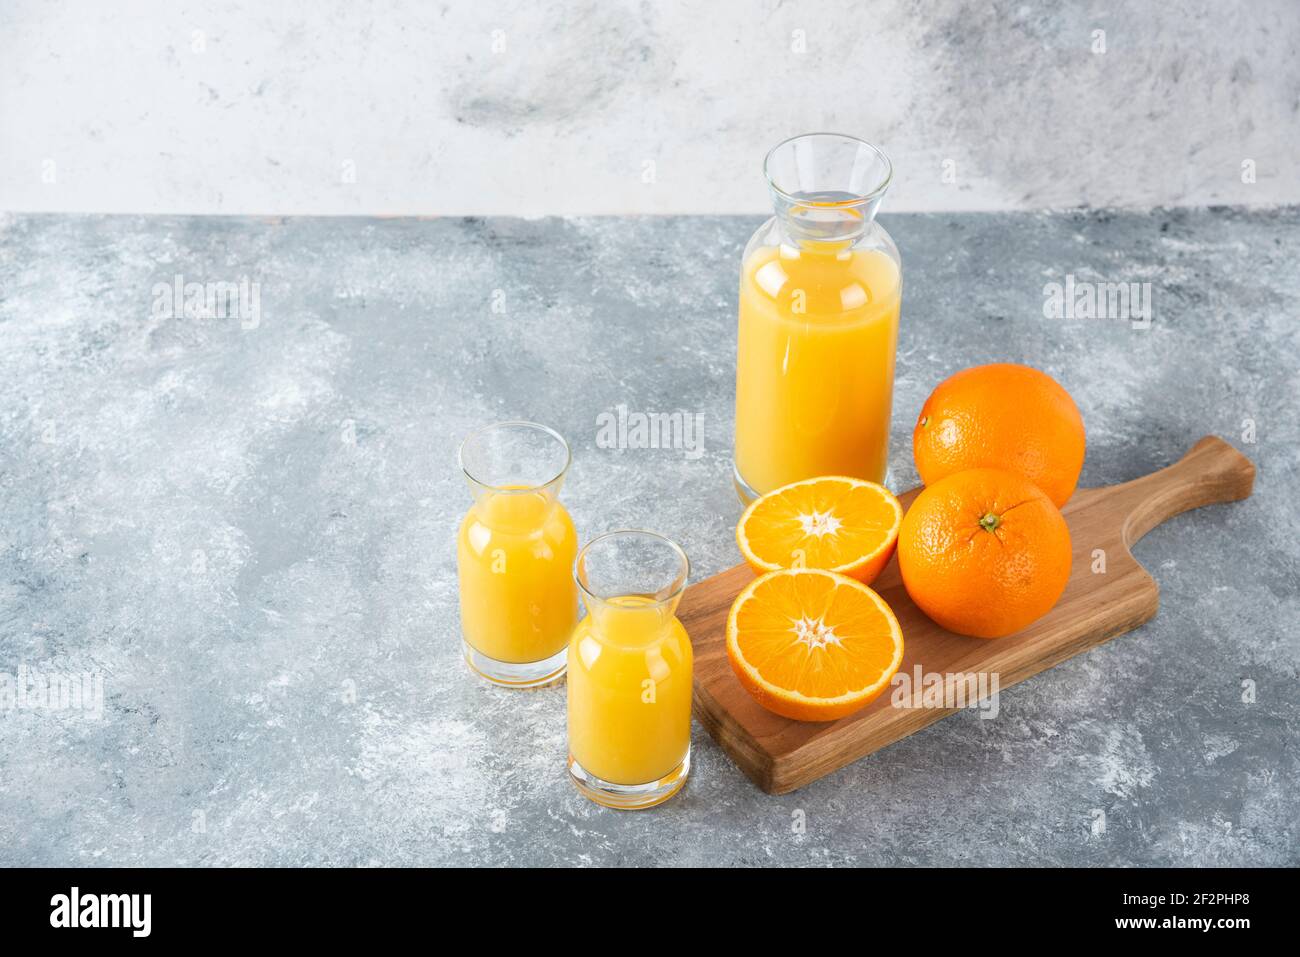 Glass pitcher of juice with sliced orange fruit on a wooden board Stock Photo